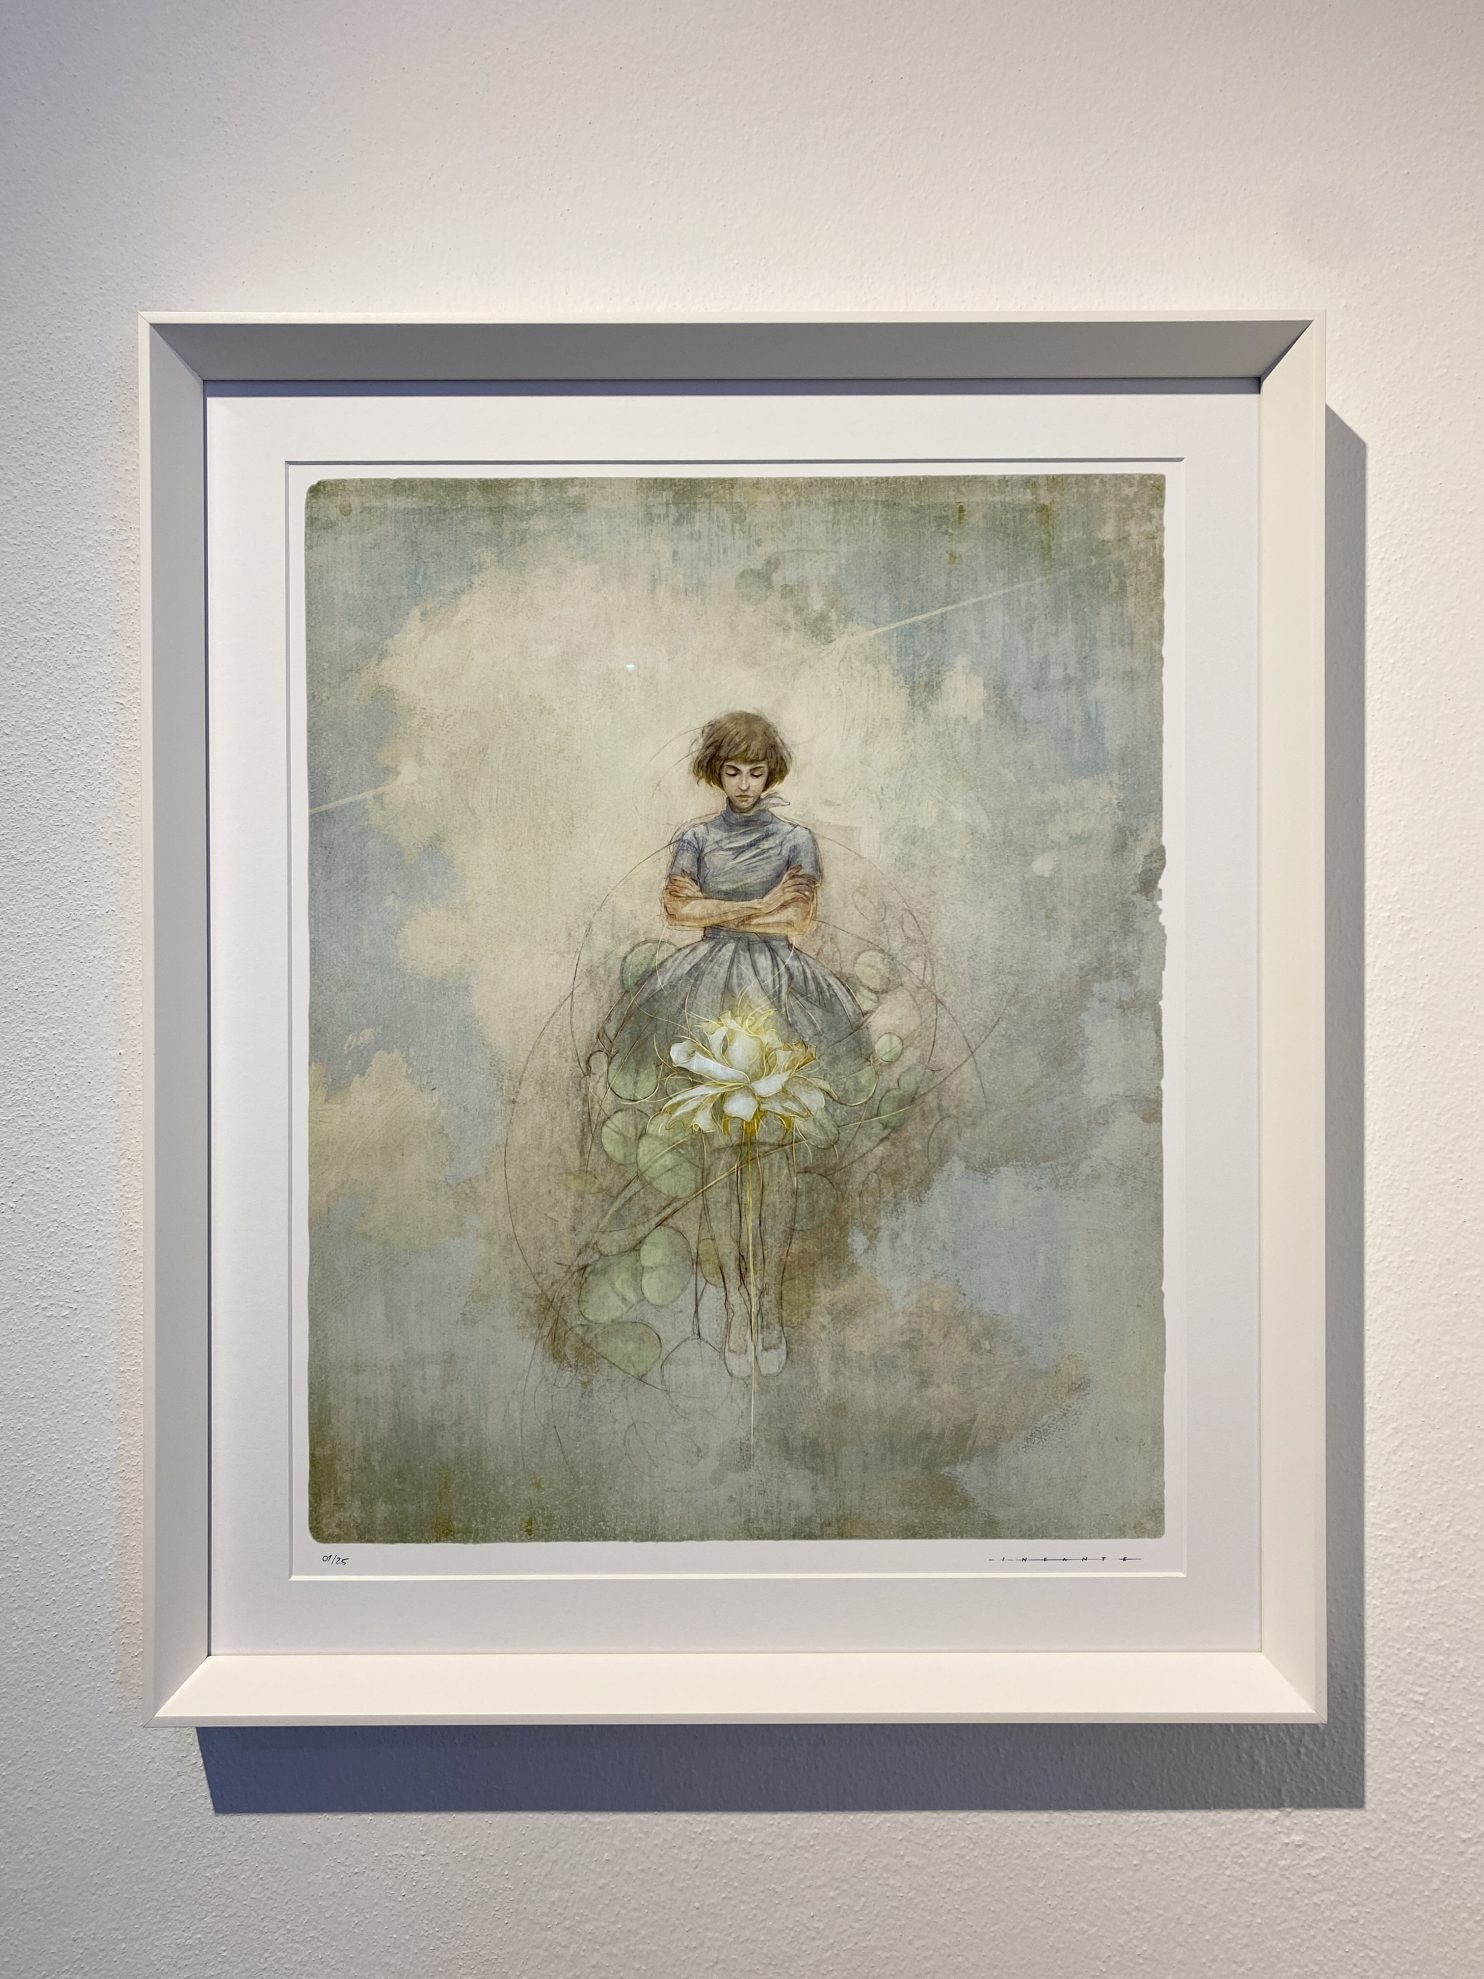 INFANTE FEDERICO, Our Lady of Miracle, 2021, Fine art prints on exhibition fiber paper, 56x43 cm_con Cornice 2